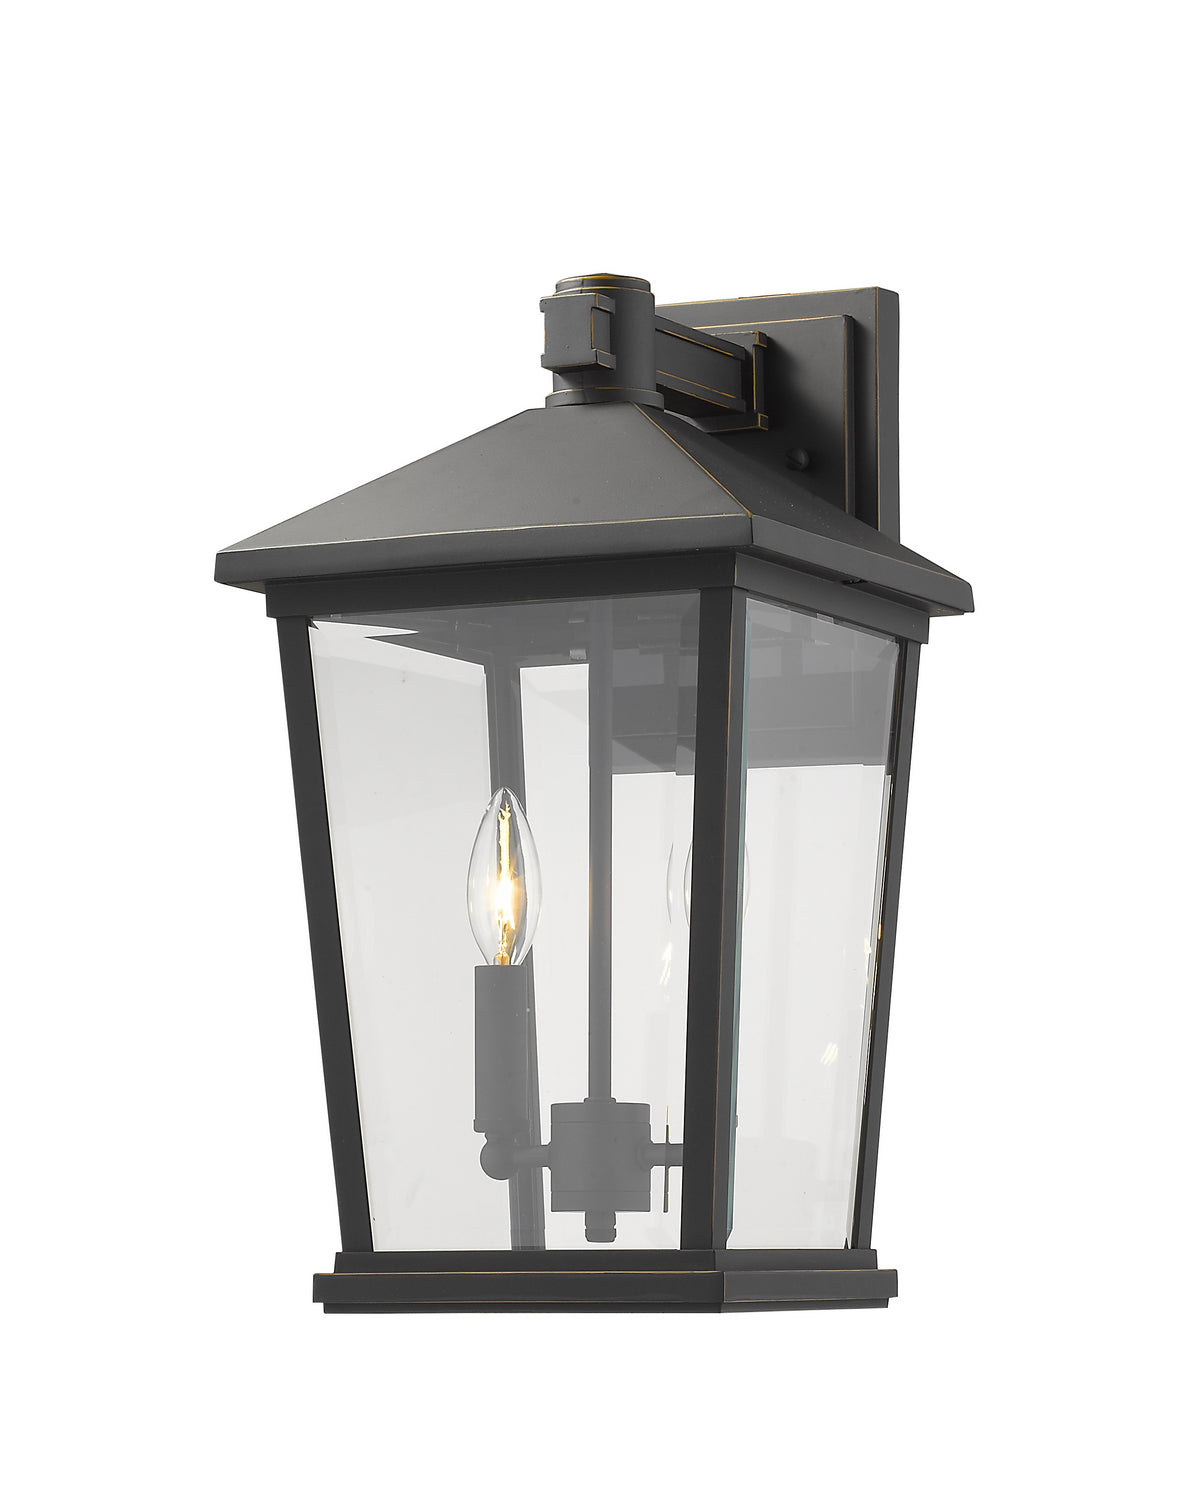 Z-Lite Canada - Two Light Outdoor Wall Mount - Beacon - Oil Rubbed Bronze- Union Lighting Luminaires Decor